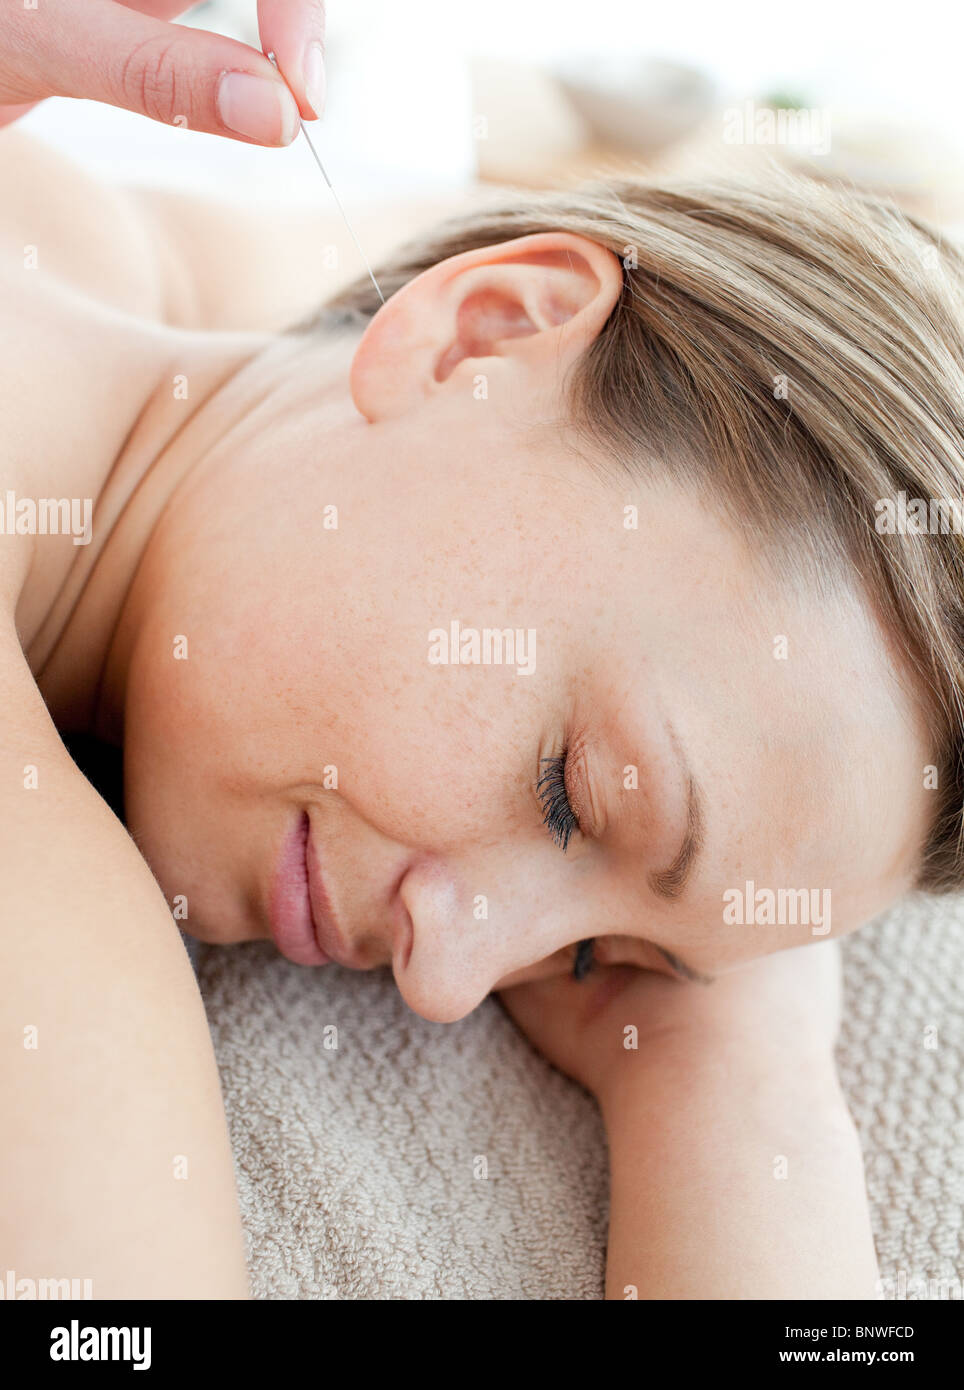 Close-up of a young woman in acupuncture therapy Stock Photo